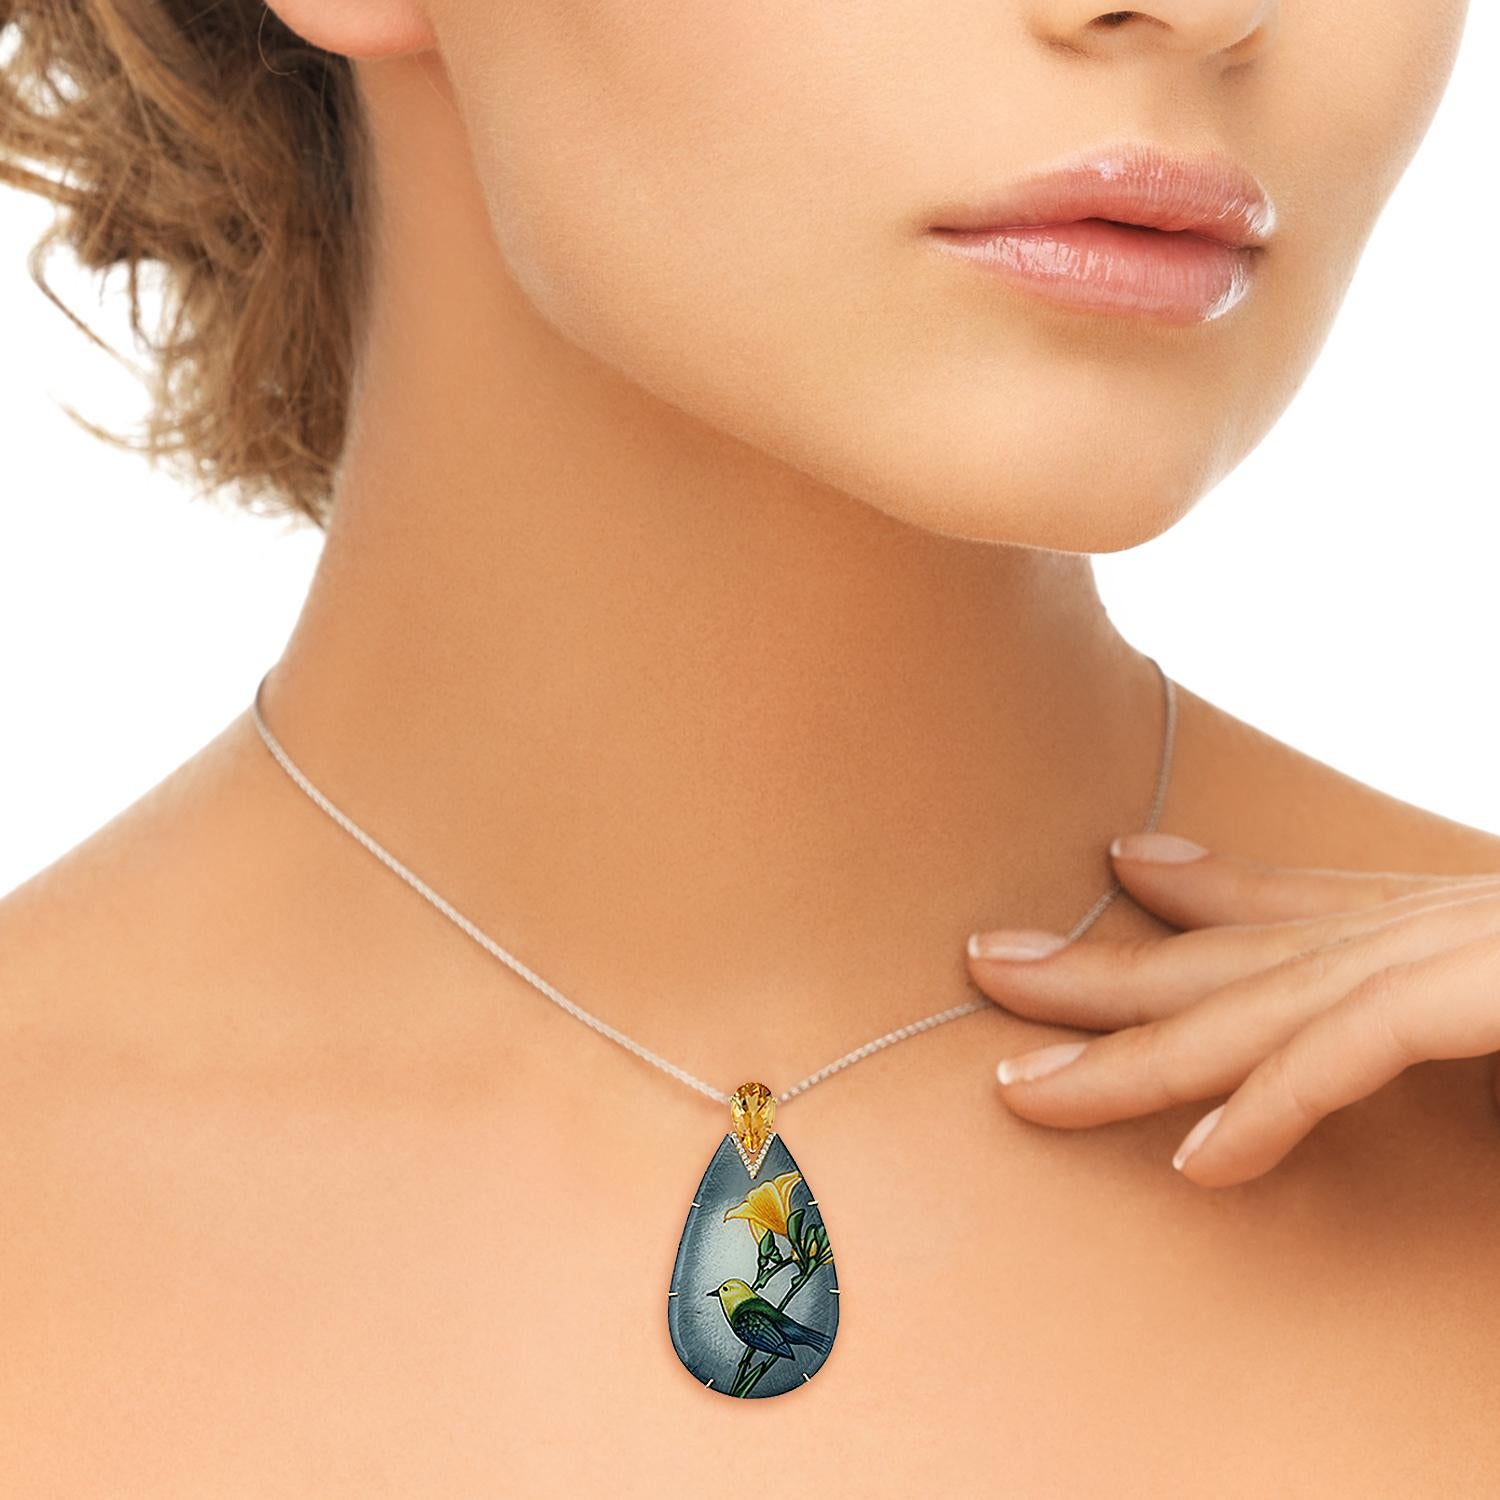 This beautiful Sparrow Enamel pendant features unique hand painted miniature in 18K gold.  It's is set with 4.1 carats Citrine  & 0.9 carats diamonds. 

FOLLOW  MEGHNA JEWELS storefront to view the latest collection & exclusive pieces.  Meghna